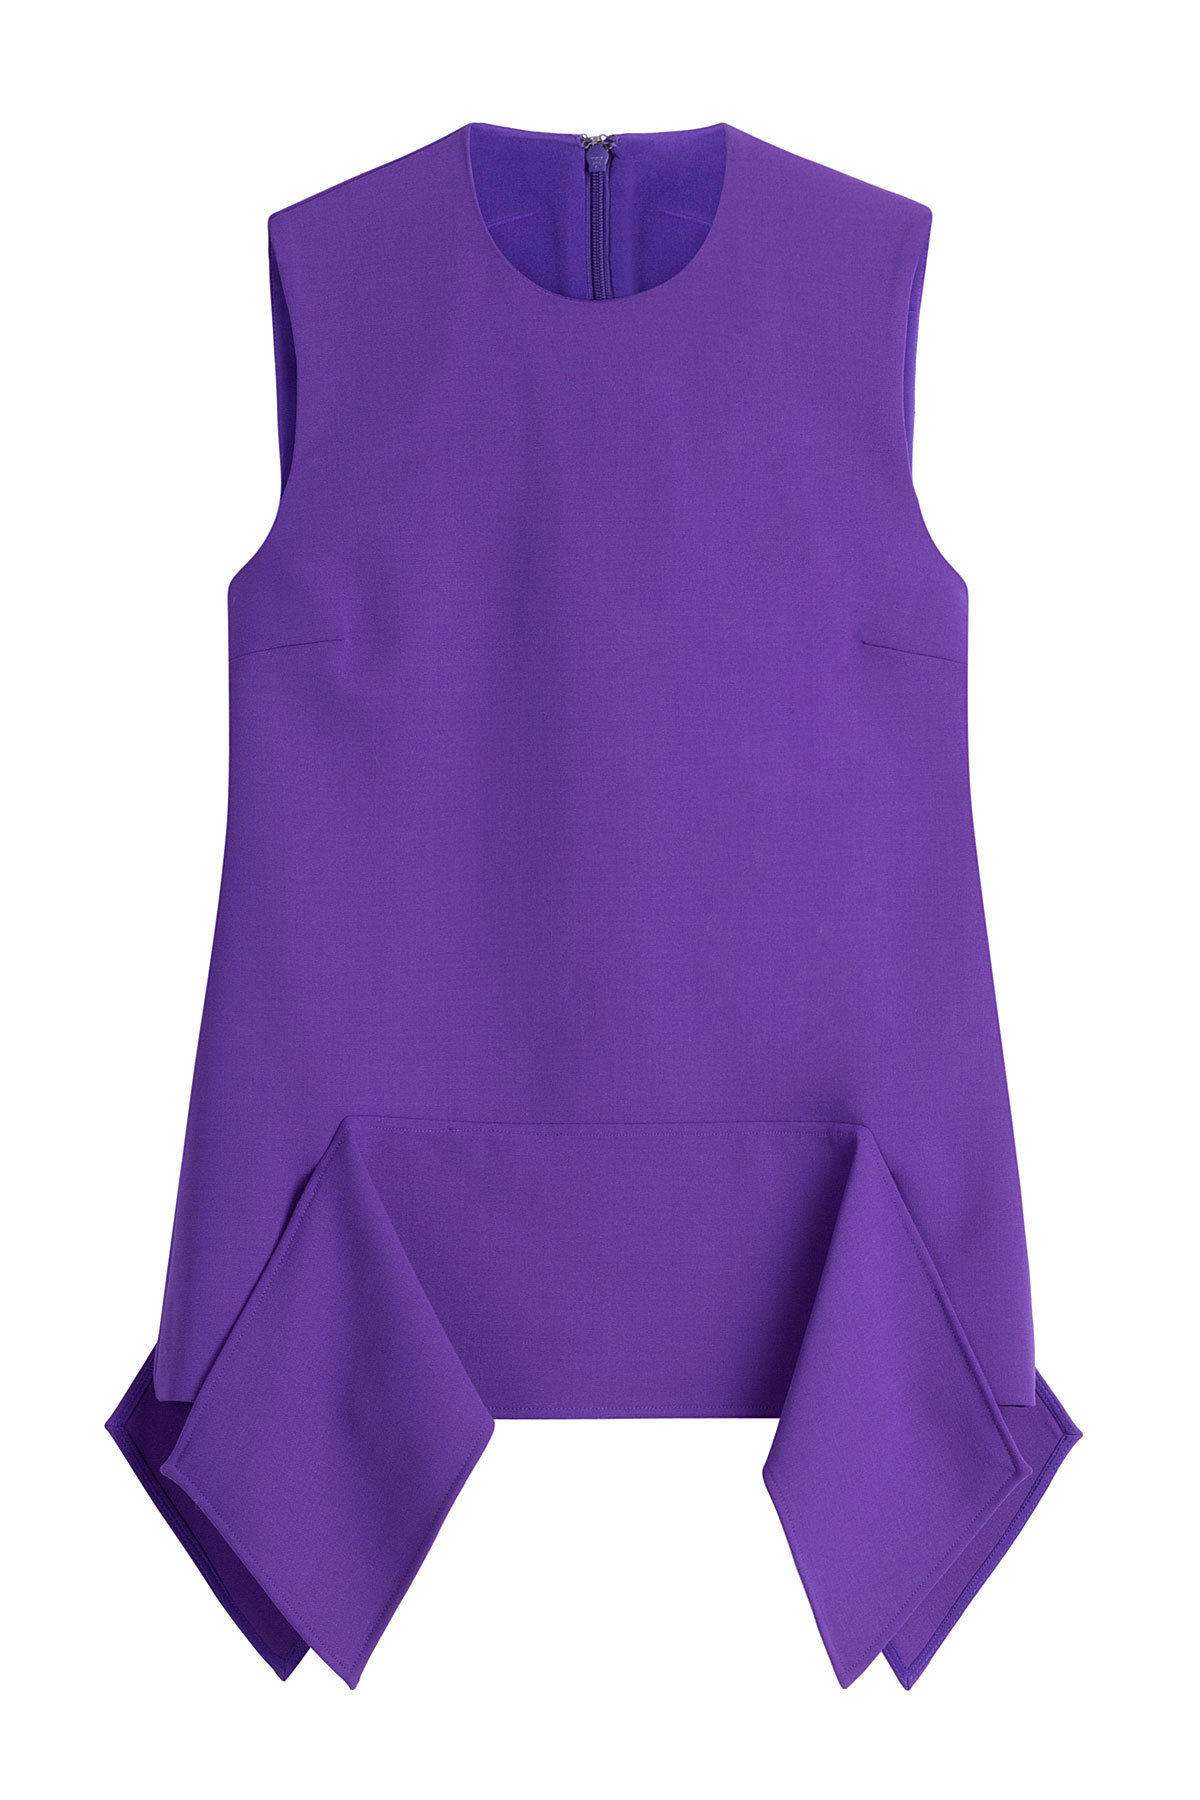 Wool Sleeveless Draped Top by Victoria Victoria Beckham